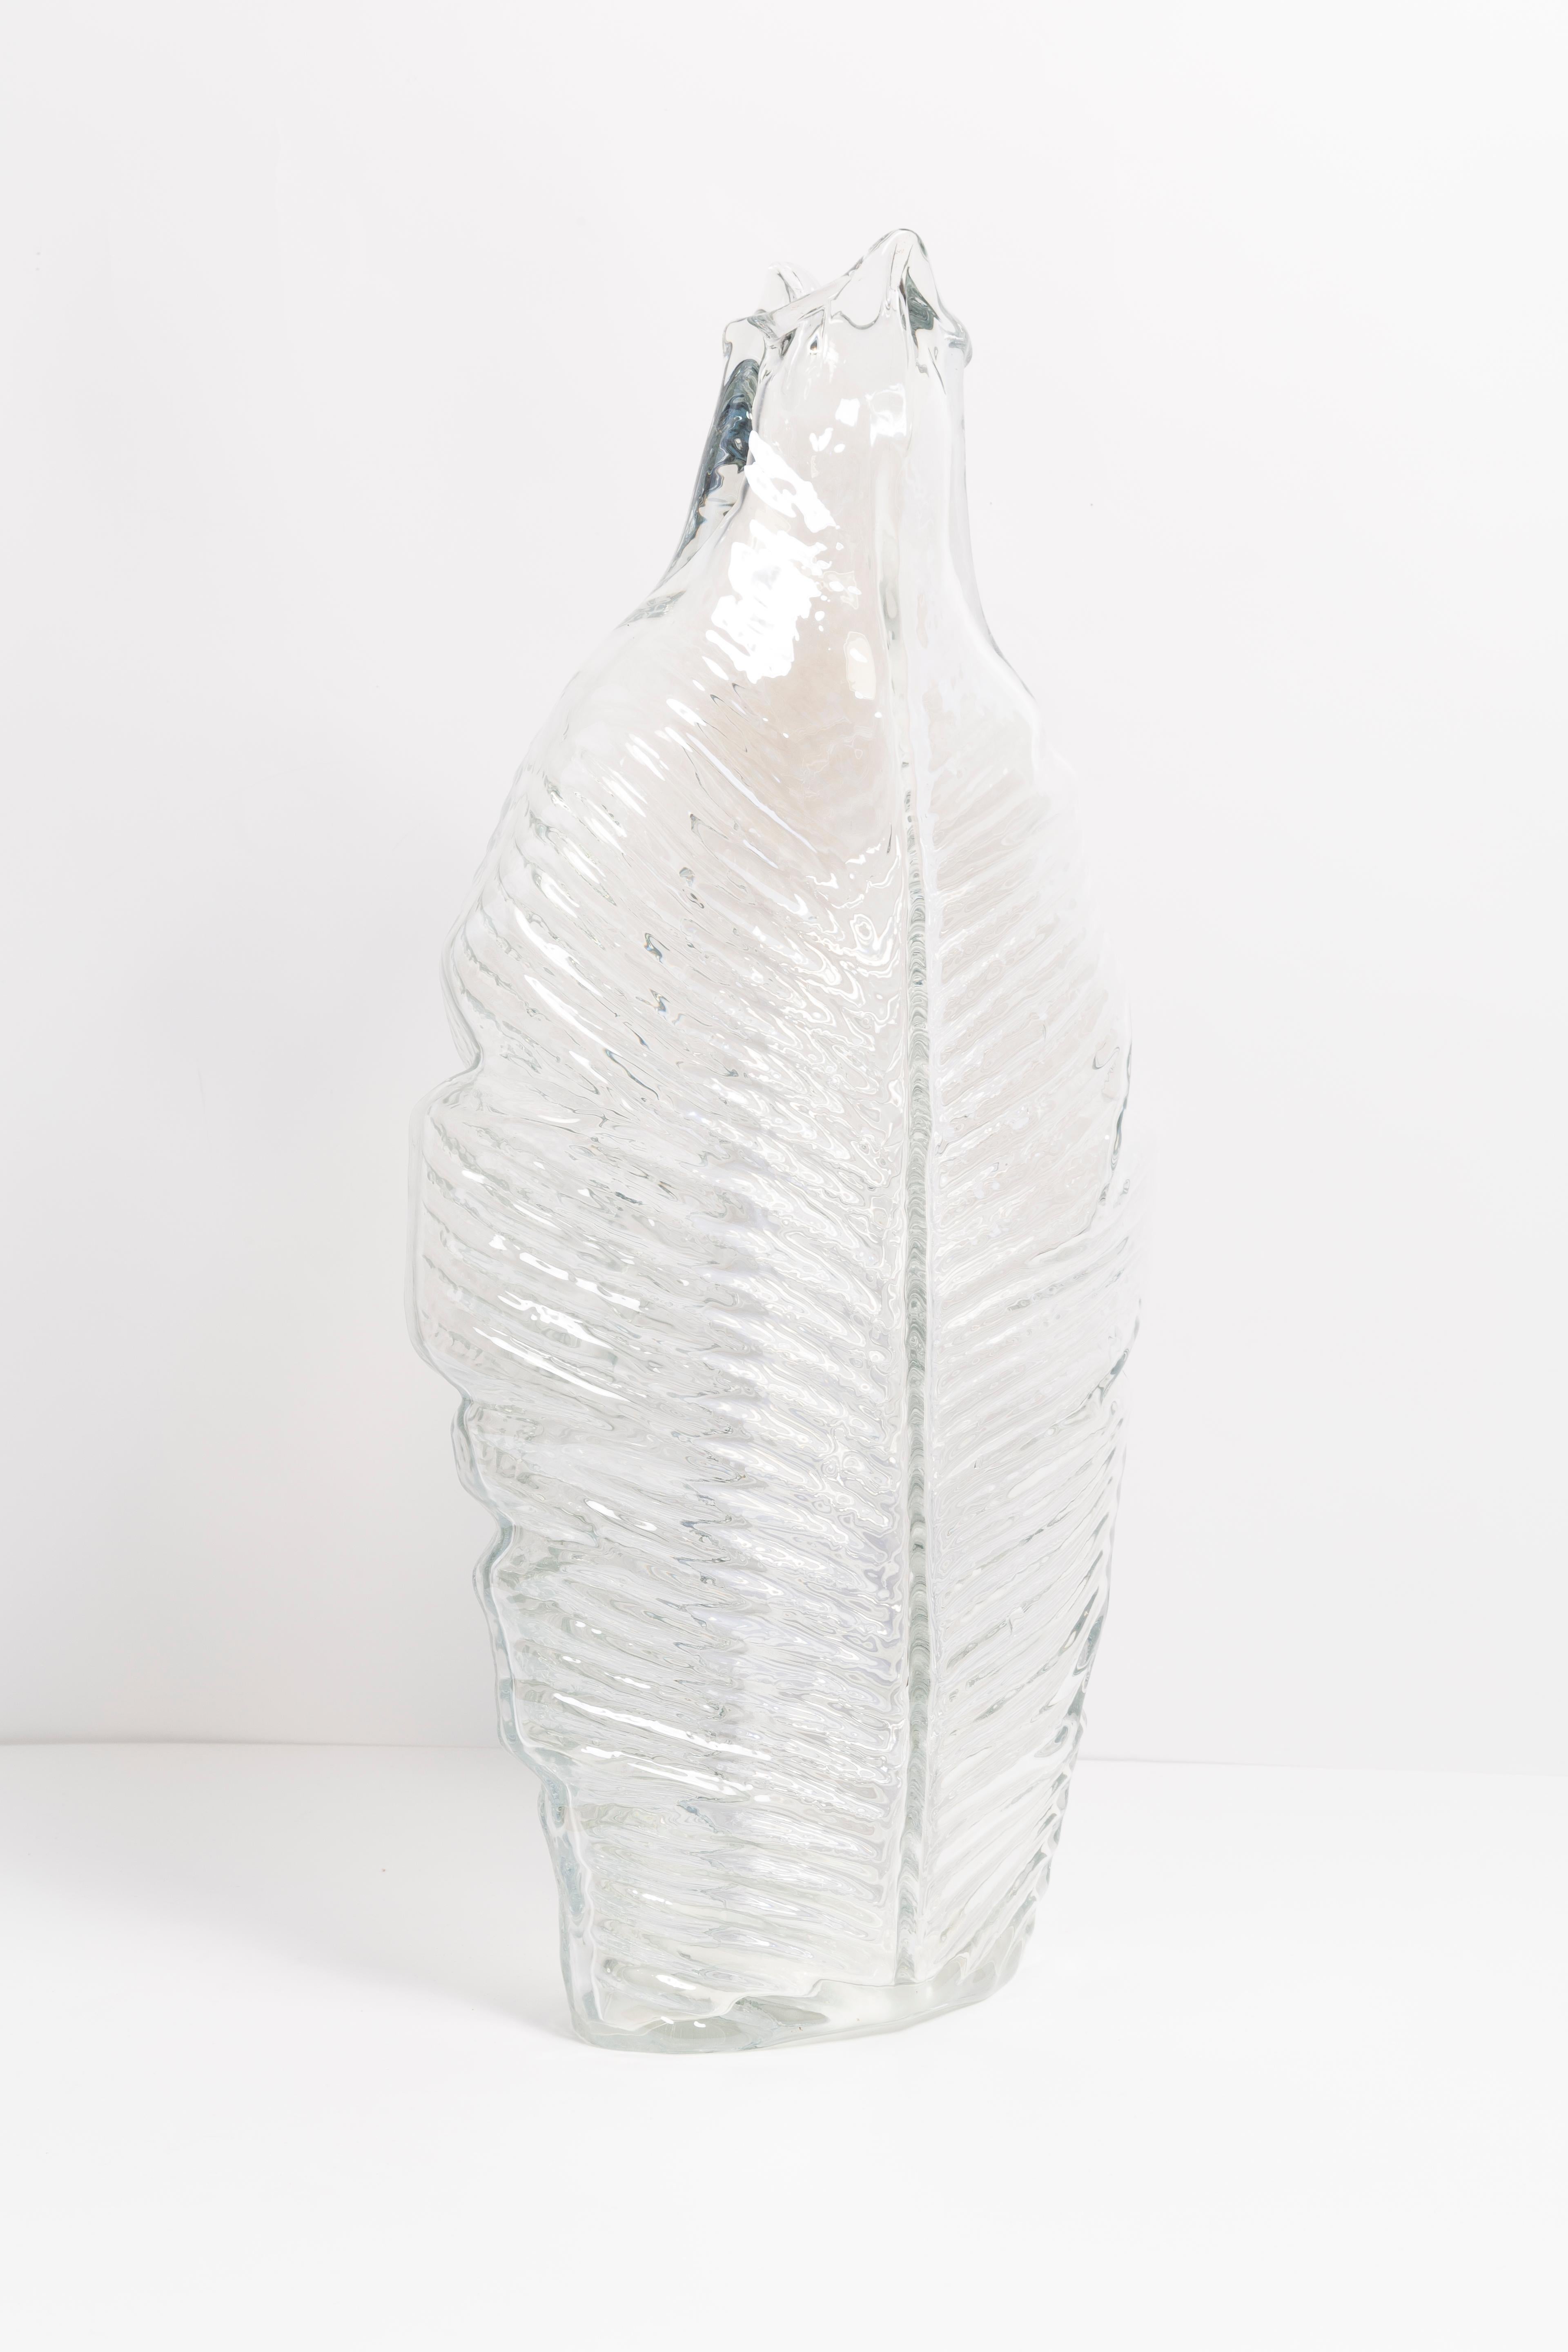 Transparent vase in amazing big leaf shape. Produced in 1960s.
Glass in perfect condition. The vase looks like it has just been taken out of the box.

No jags, defects etc. The outer relief surface, the inner smooth. Thick glass vase,